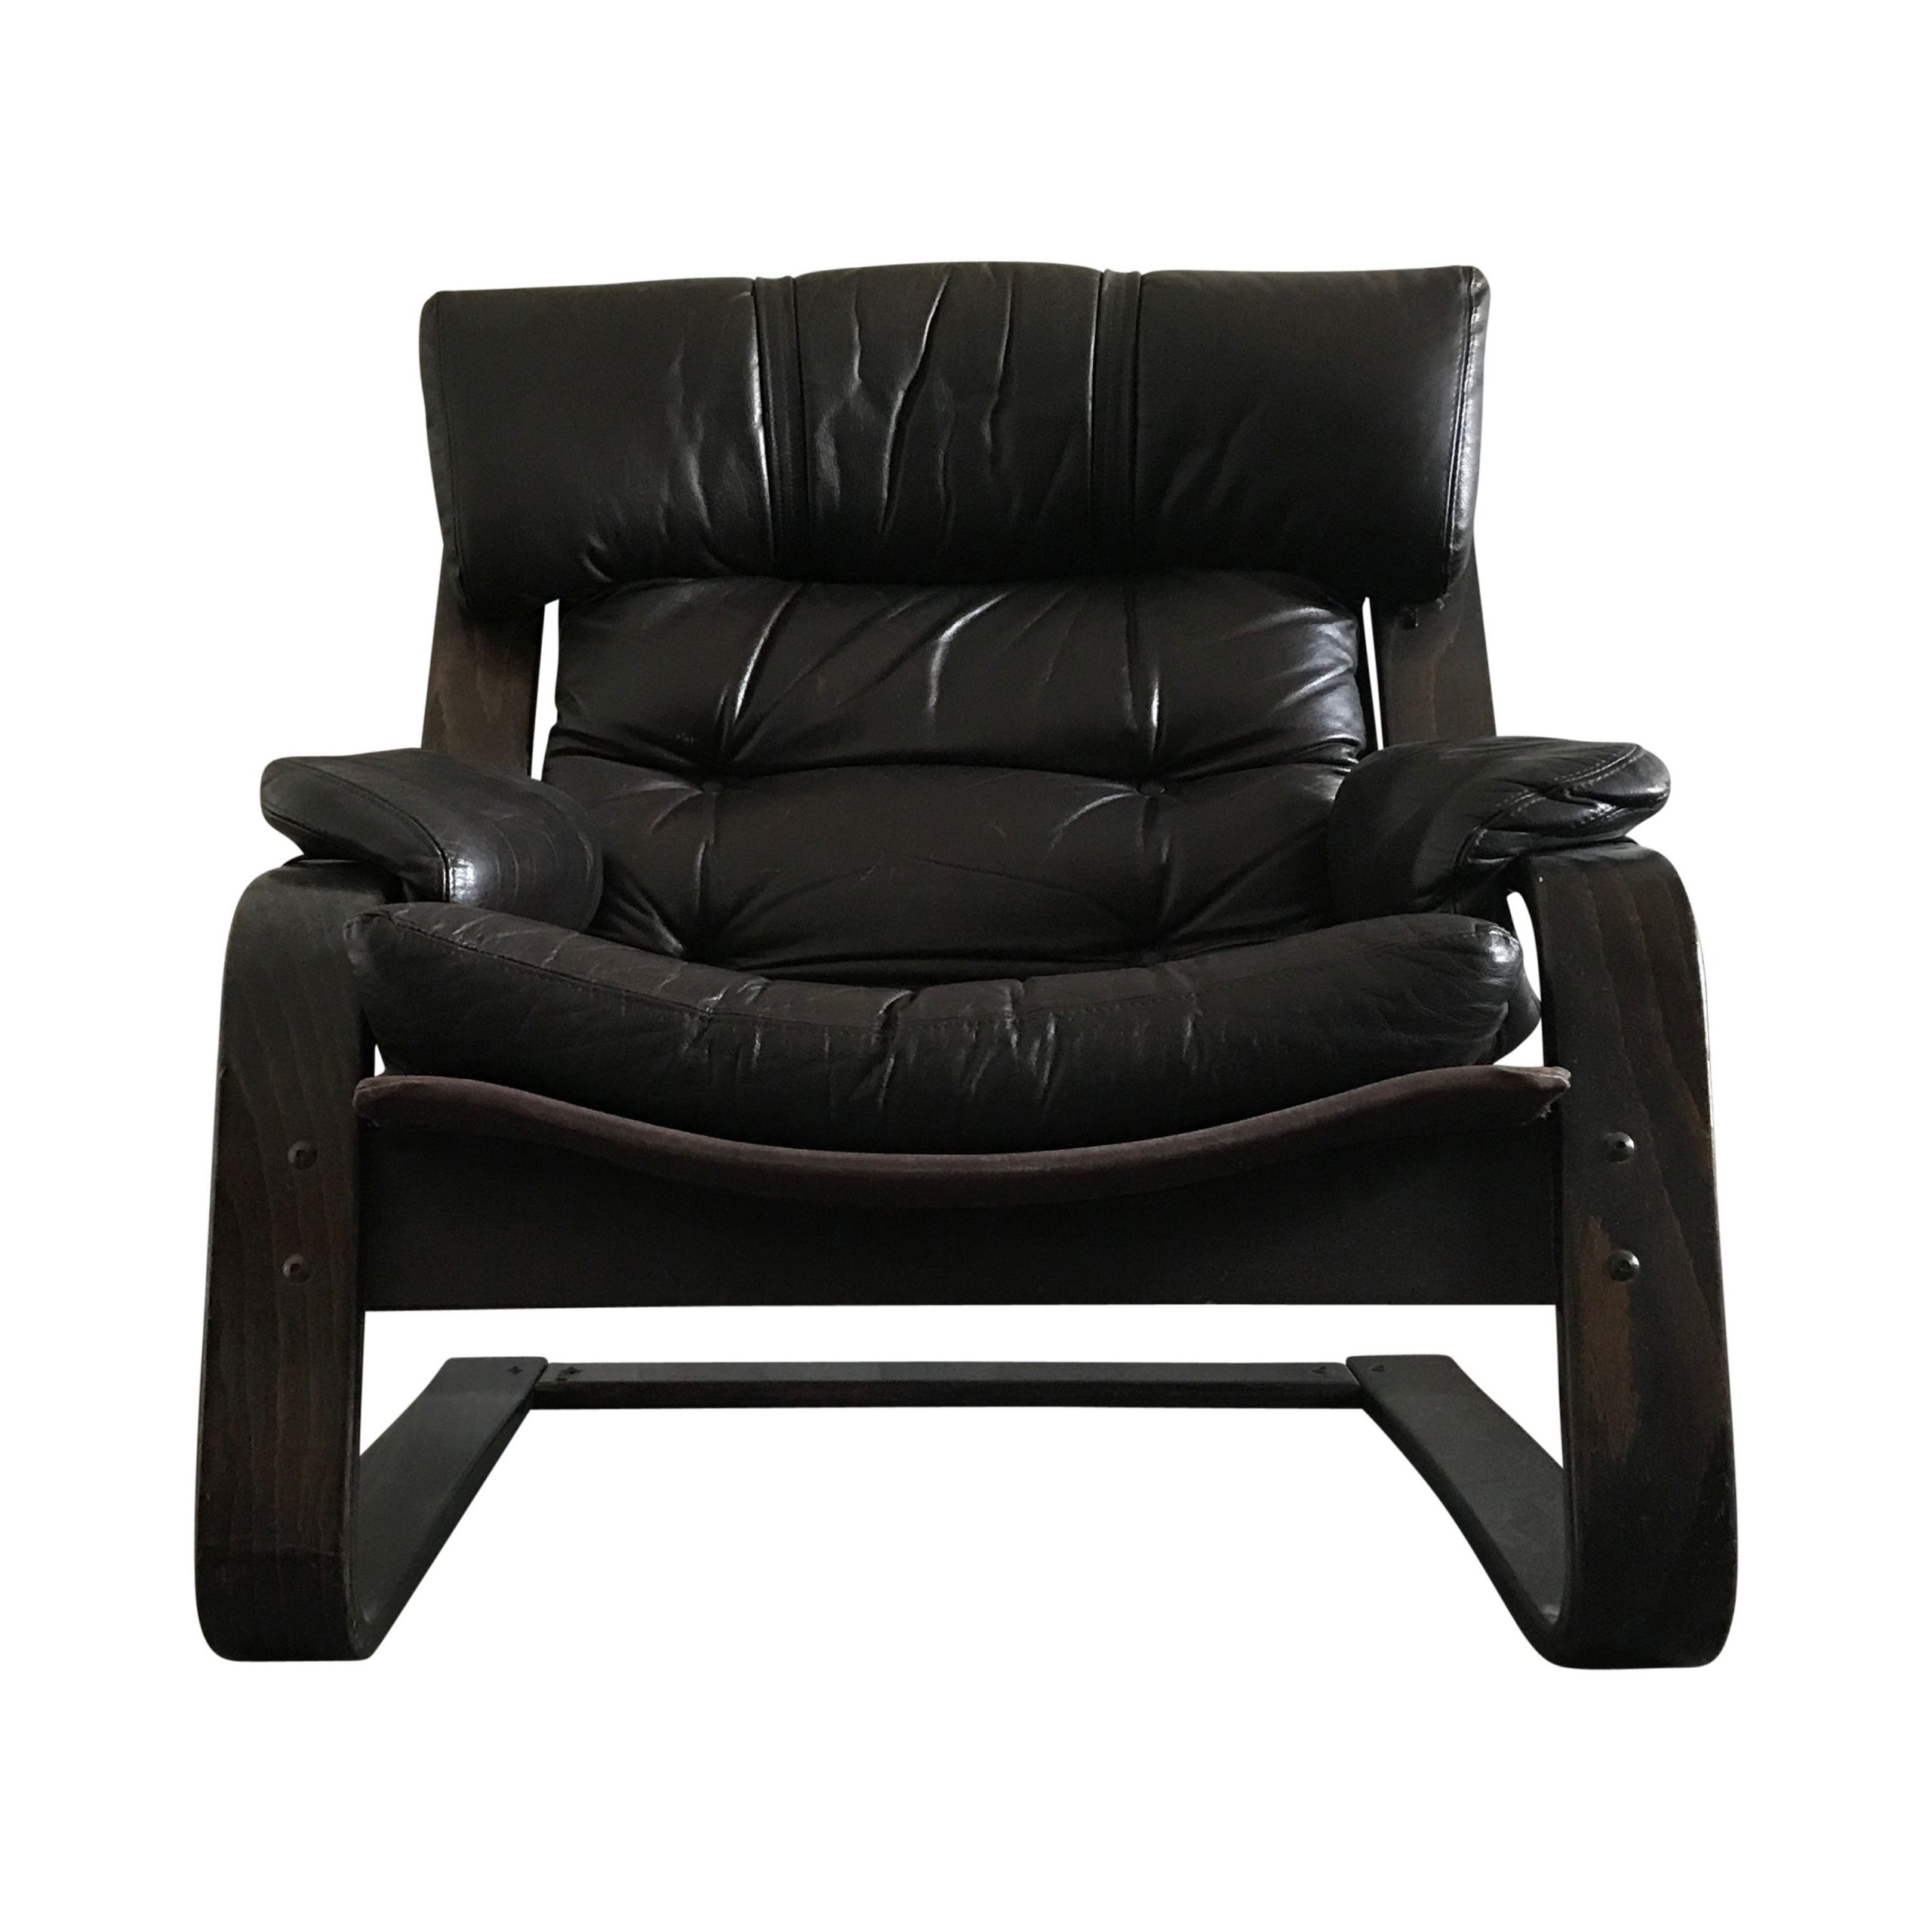 vintage-leather-and-wood-recliner-armchair-by-gote-mobel-sweden-1970s8-scaled-1.jpeg